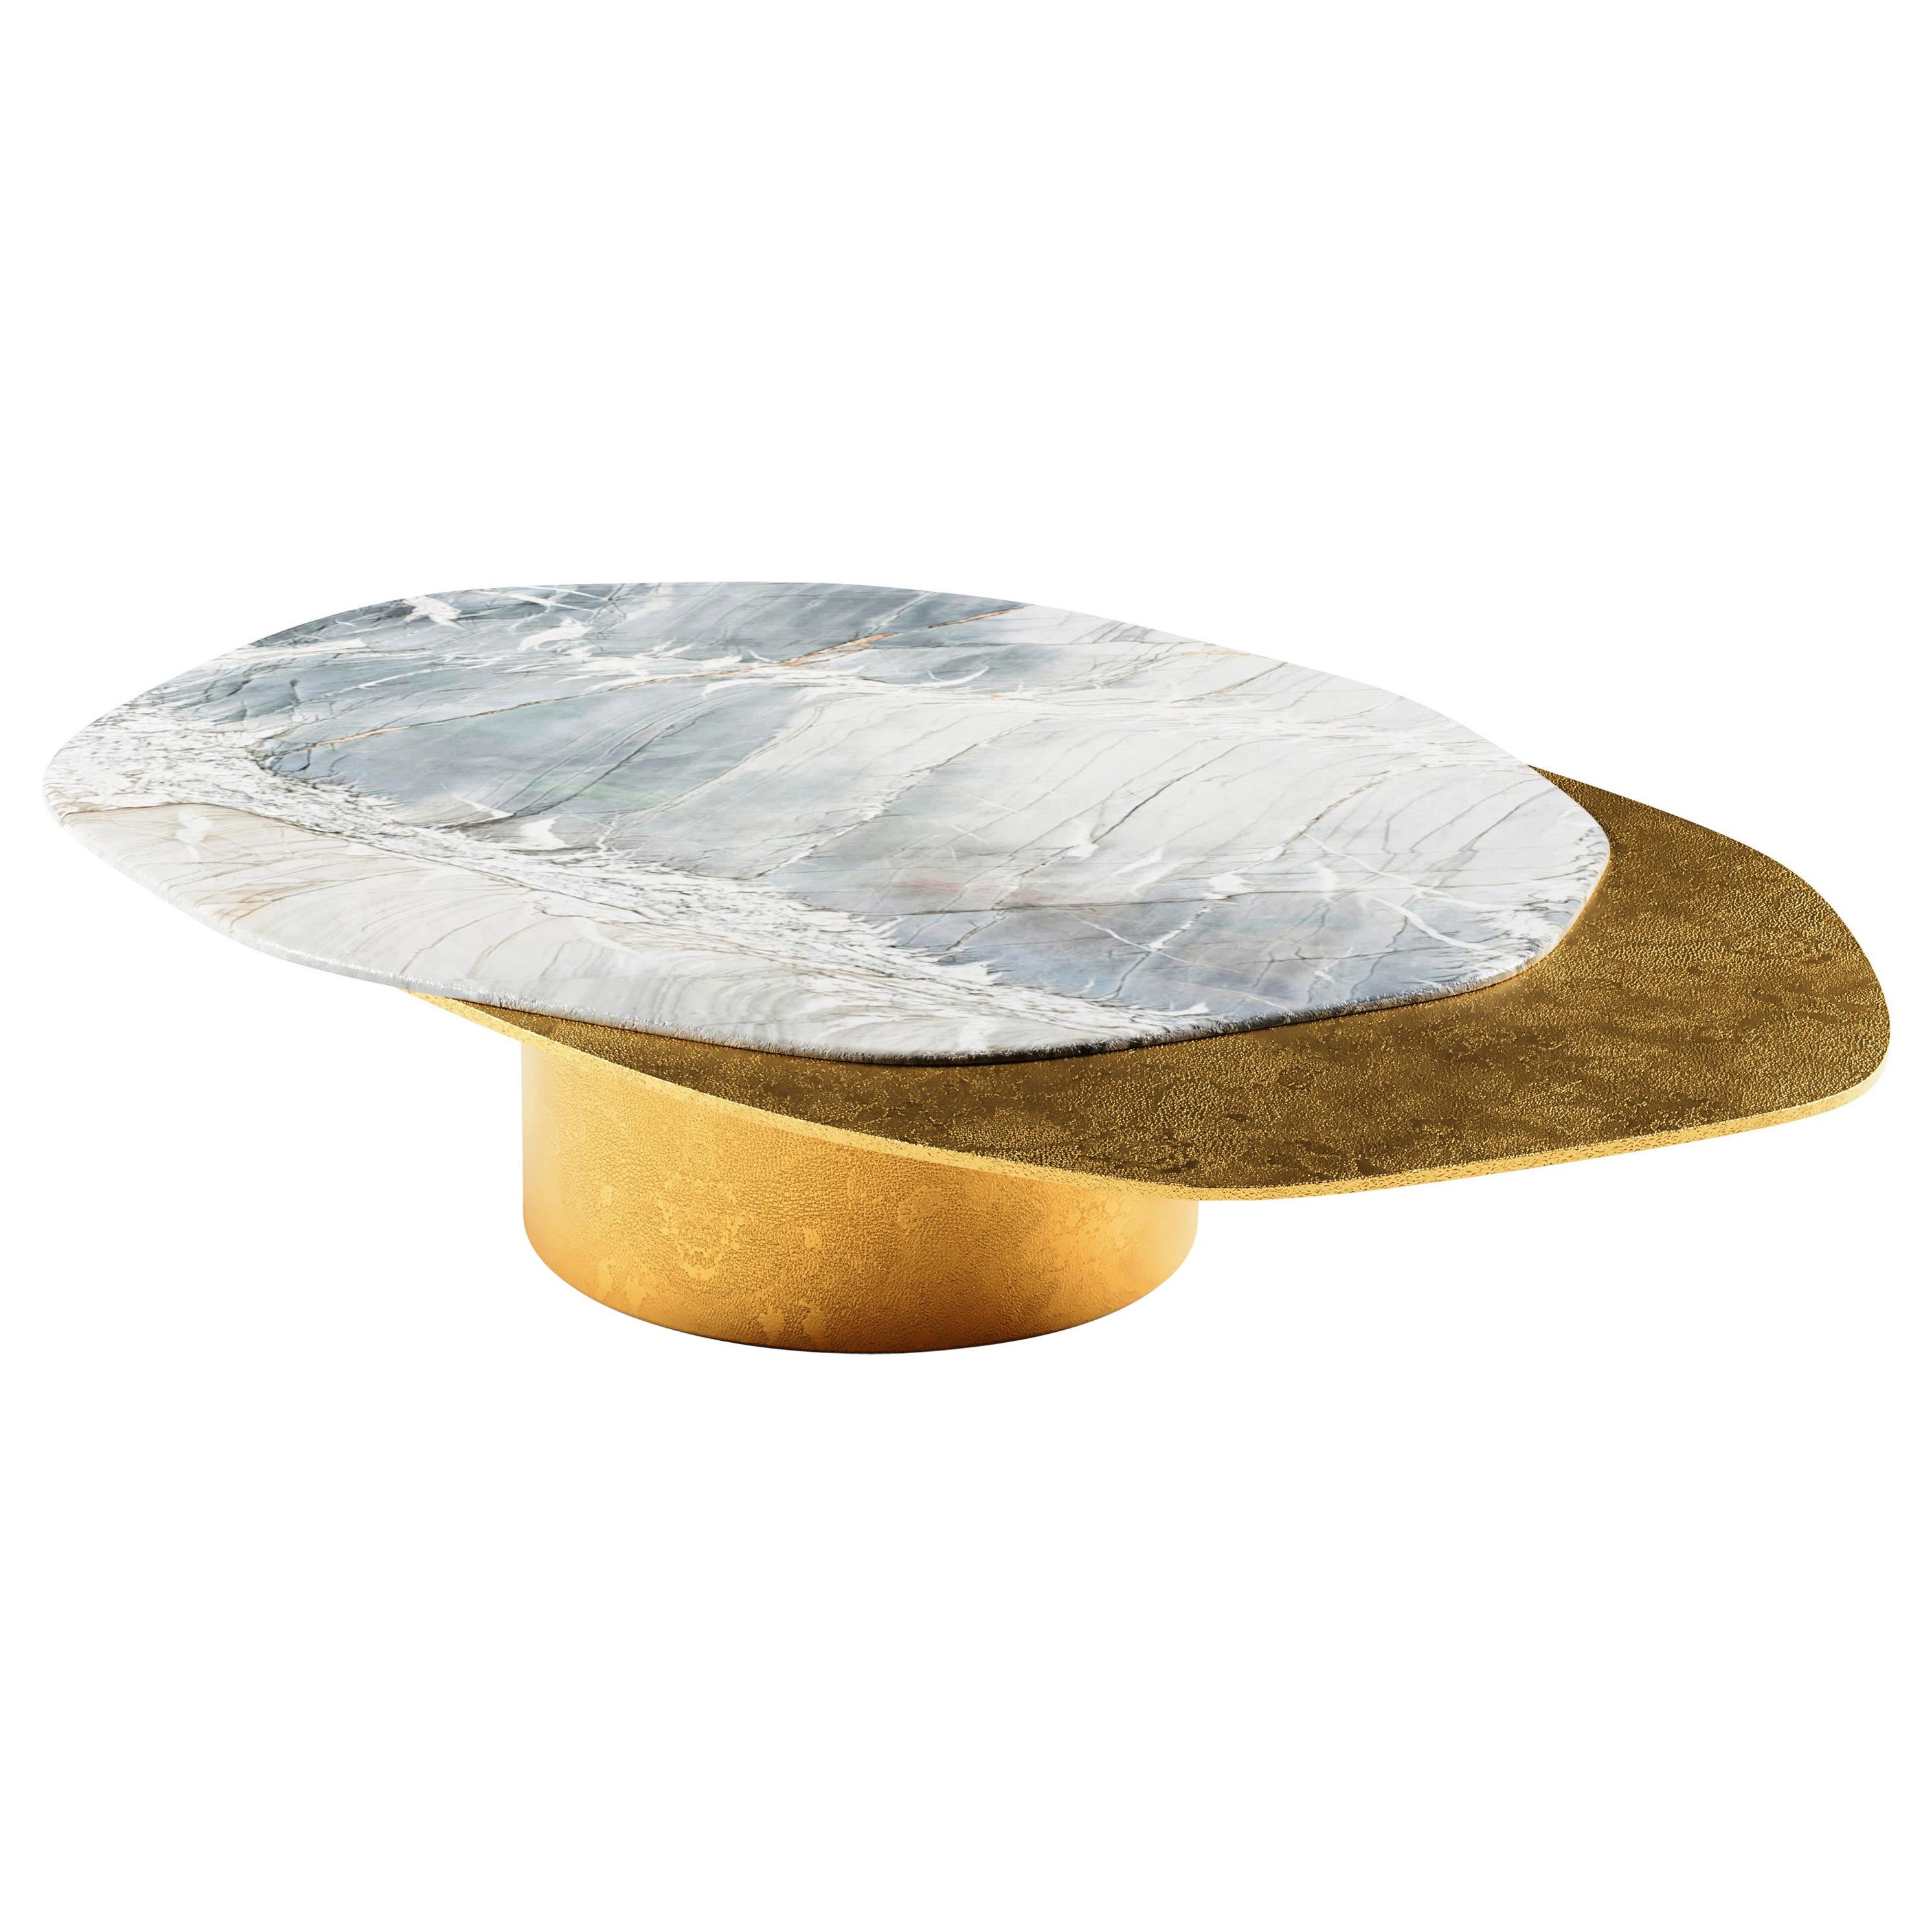 "Epicure II" Center Table ft. Quartzite and Windy Gold Brass by Grzegorz Majka